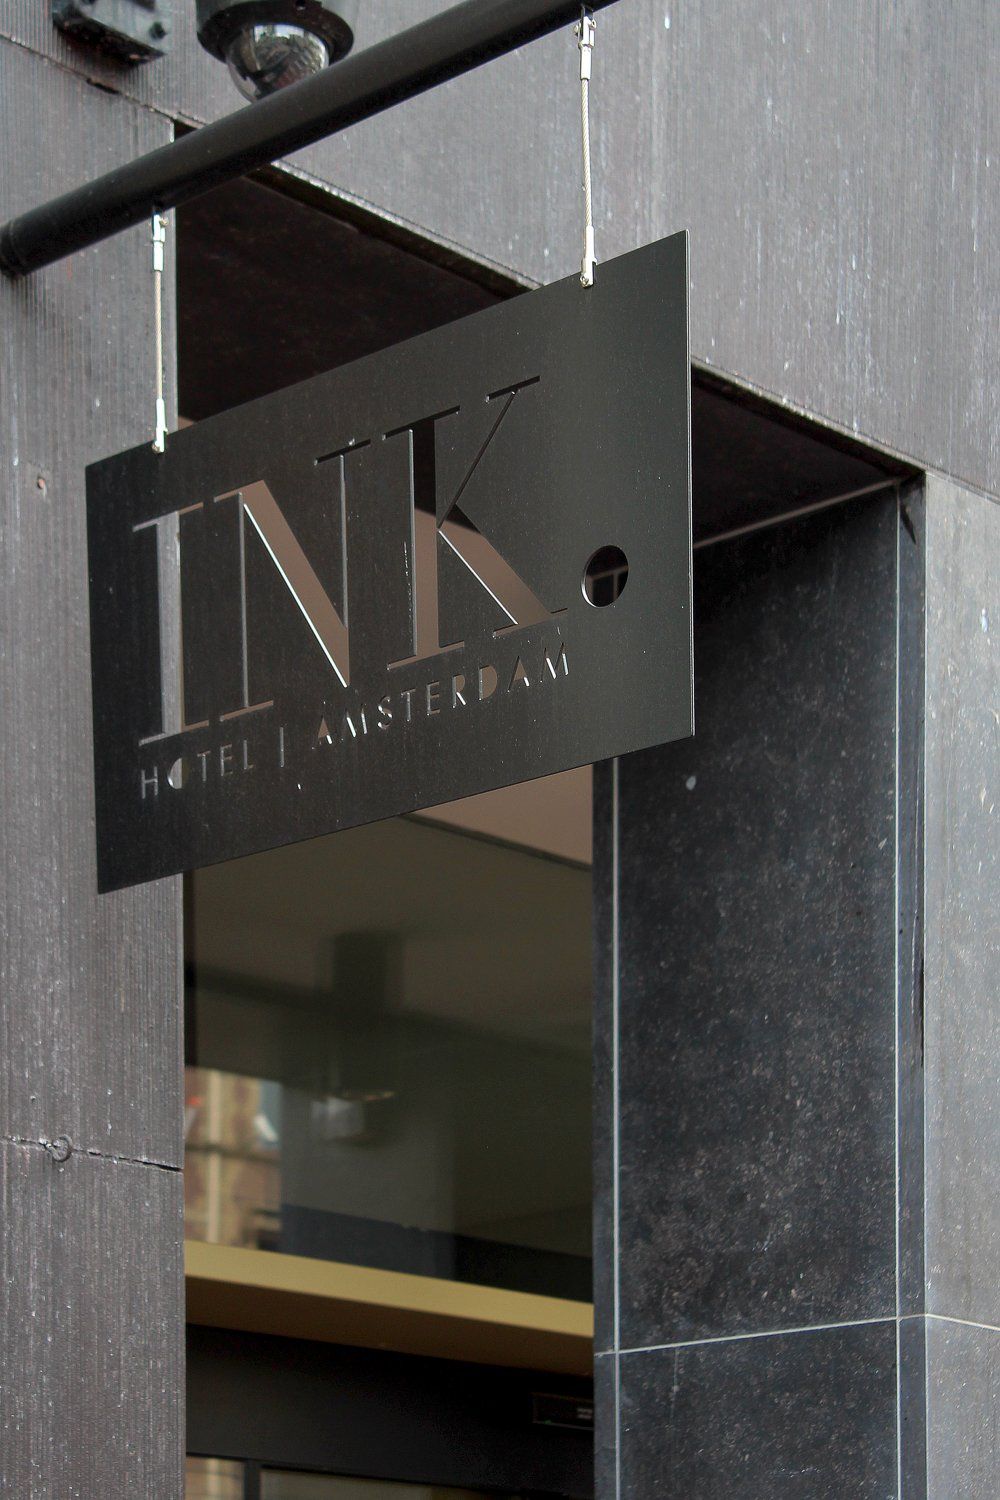 The entrance of the Ink Hotel Amsterdam on Nieuwezijds Voorburgwal